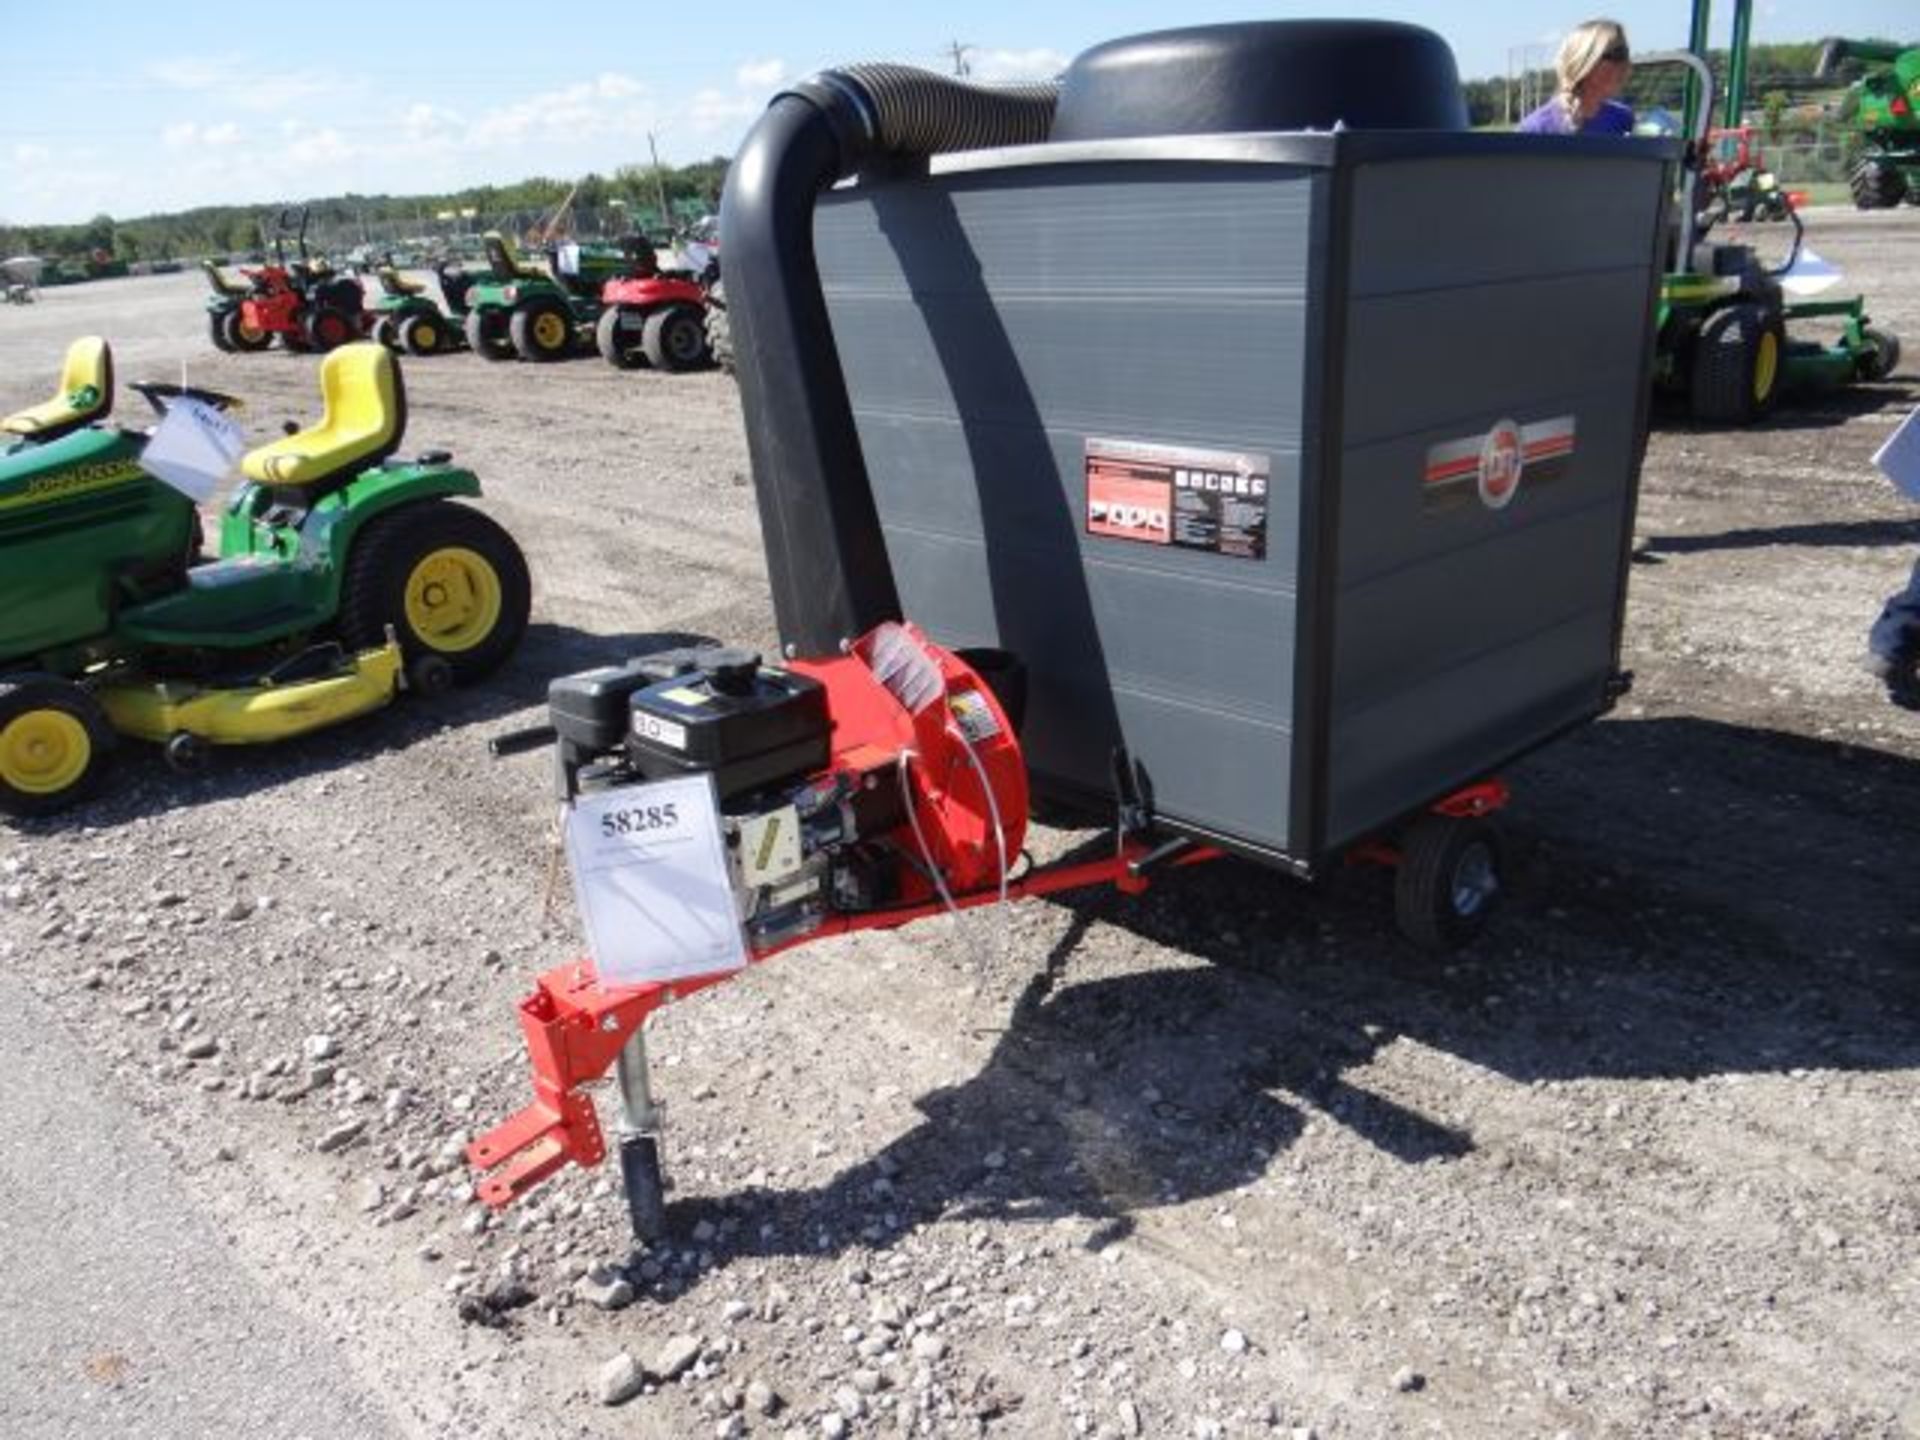 Lot 58285 - DR Leaf/Lawn Vacuum Pull Behind Collector On 2 Wheel Cart, Electric Start Engine,